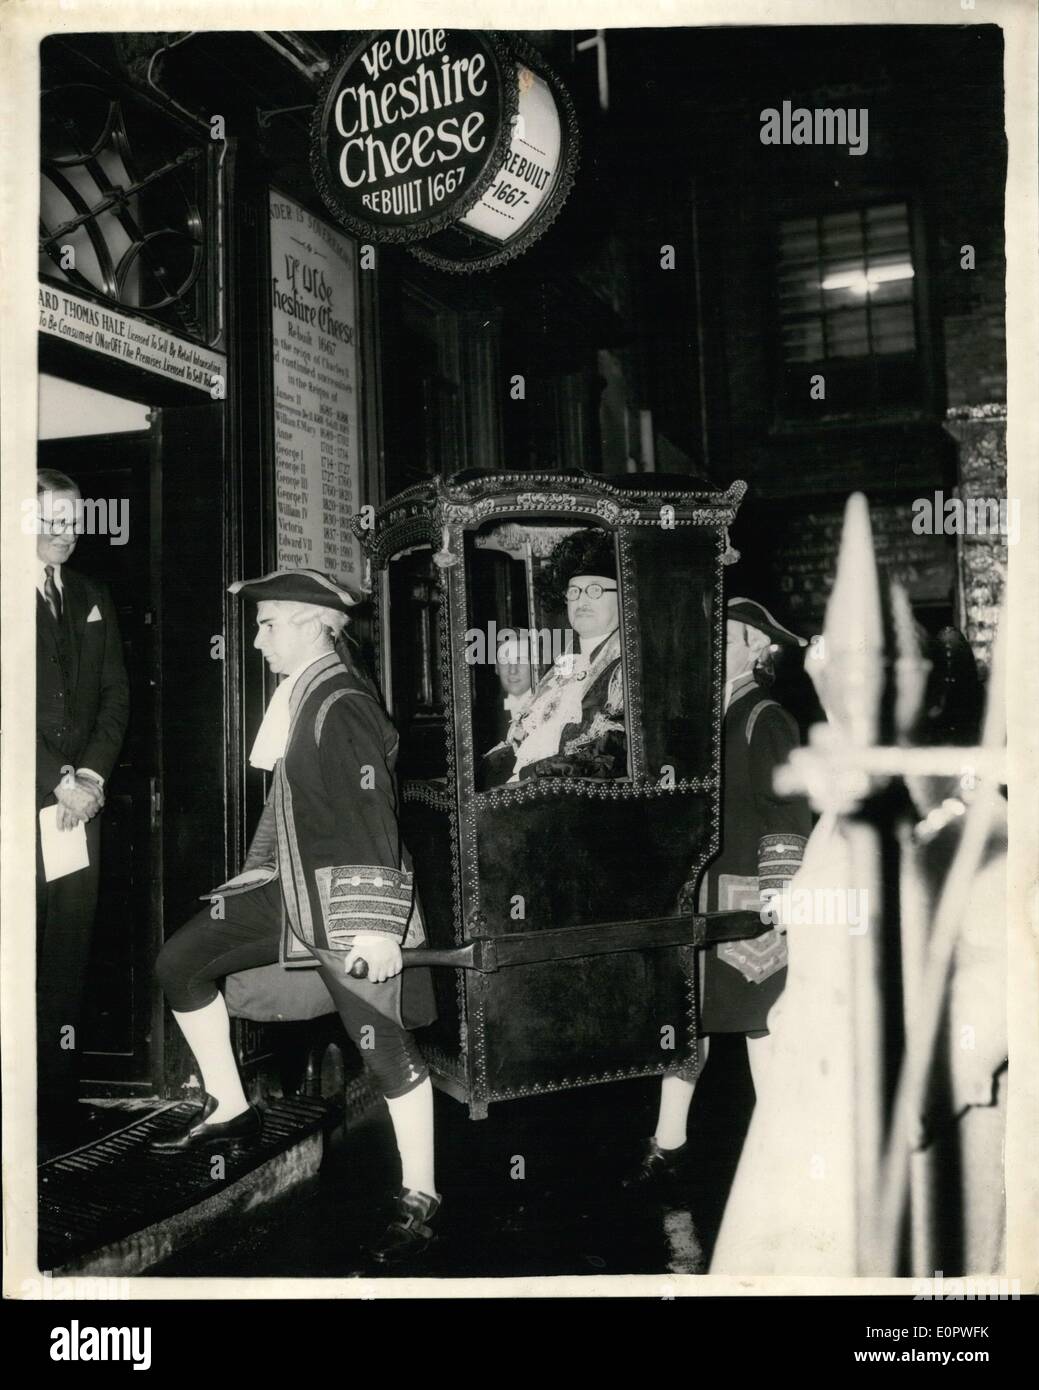 Jan. 01, 1957 - The Lord Mayor in a Sedan Chair: The-Centenary of ''Ye Oide Cheshire Cheese''. Sir Cullum Welch the Lord Mayor of London this evening was carried into the Cheshire Cheese - Fleet Street - in a Sedan Chair - and was welcomed by minstrals wearing 17th. century costumes. This is to mark ter. centenary of the famous old coffee house - and to launch ''The Penny Universities'' a book on old time coffee houses - by Mr. Aytoun Ellis. Photo Shows The Lord Mayor arrives in 17th. Century style - at the Cheshire Cheese this evening. Stock Photo